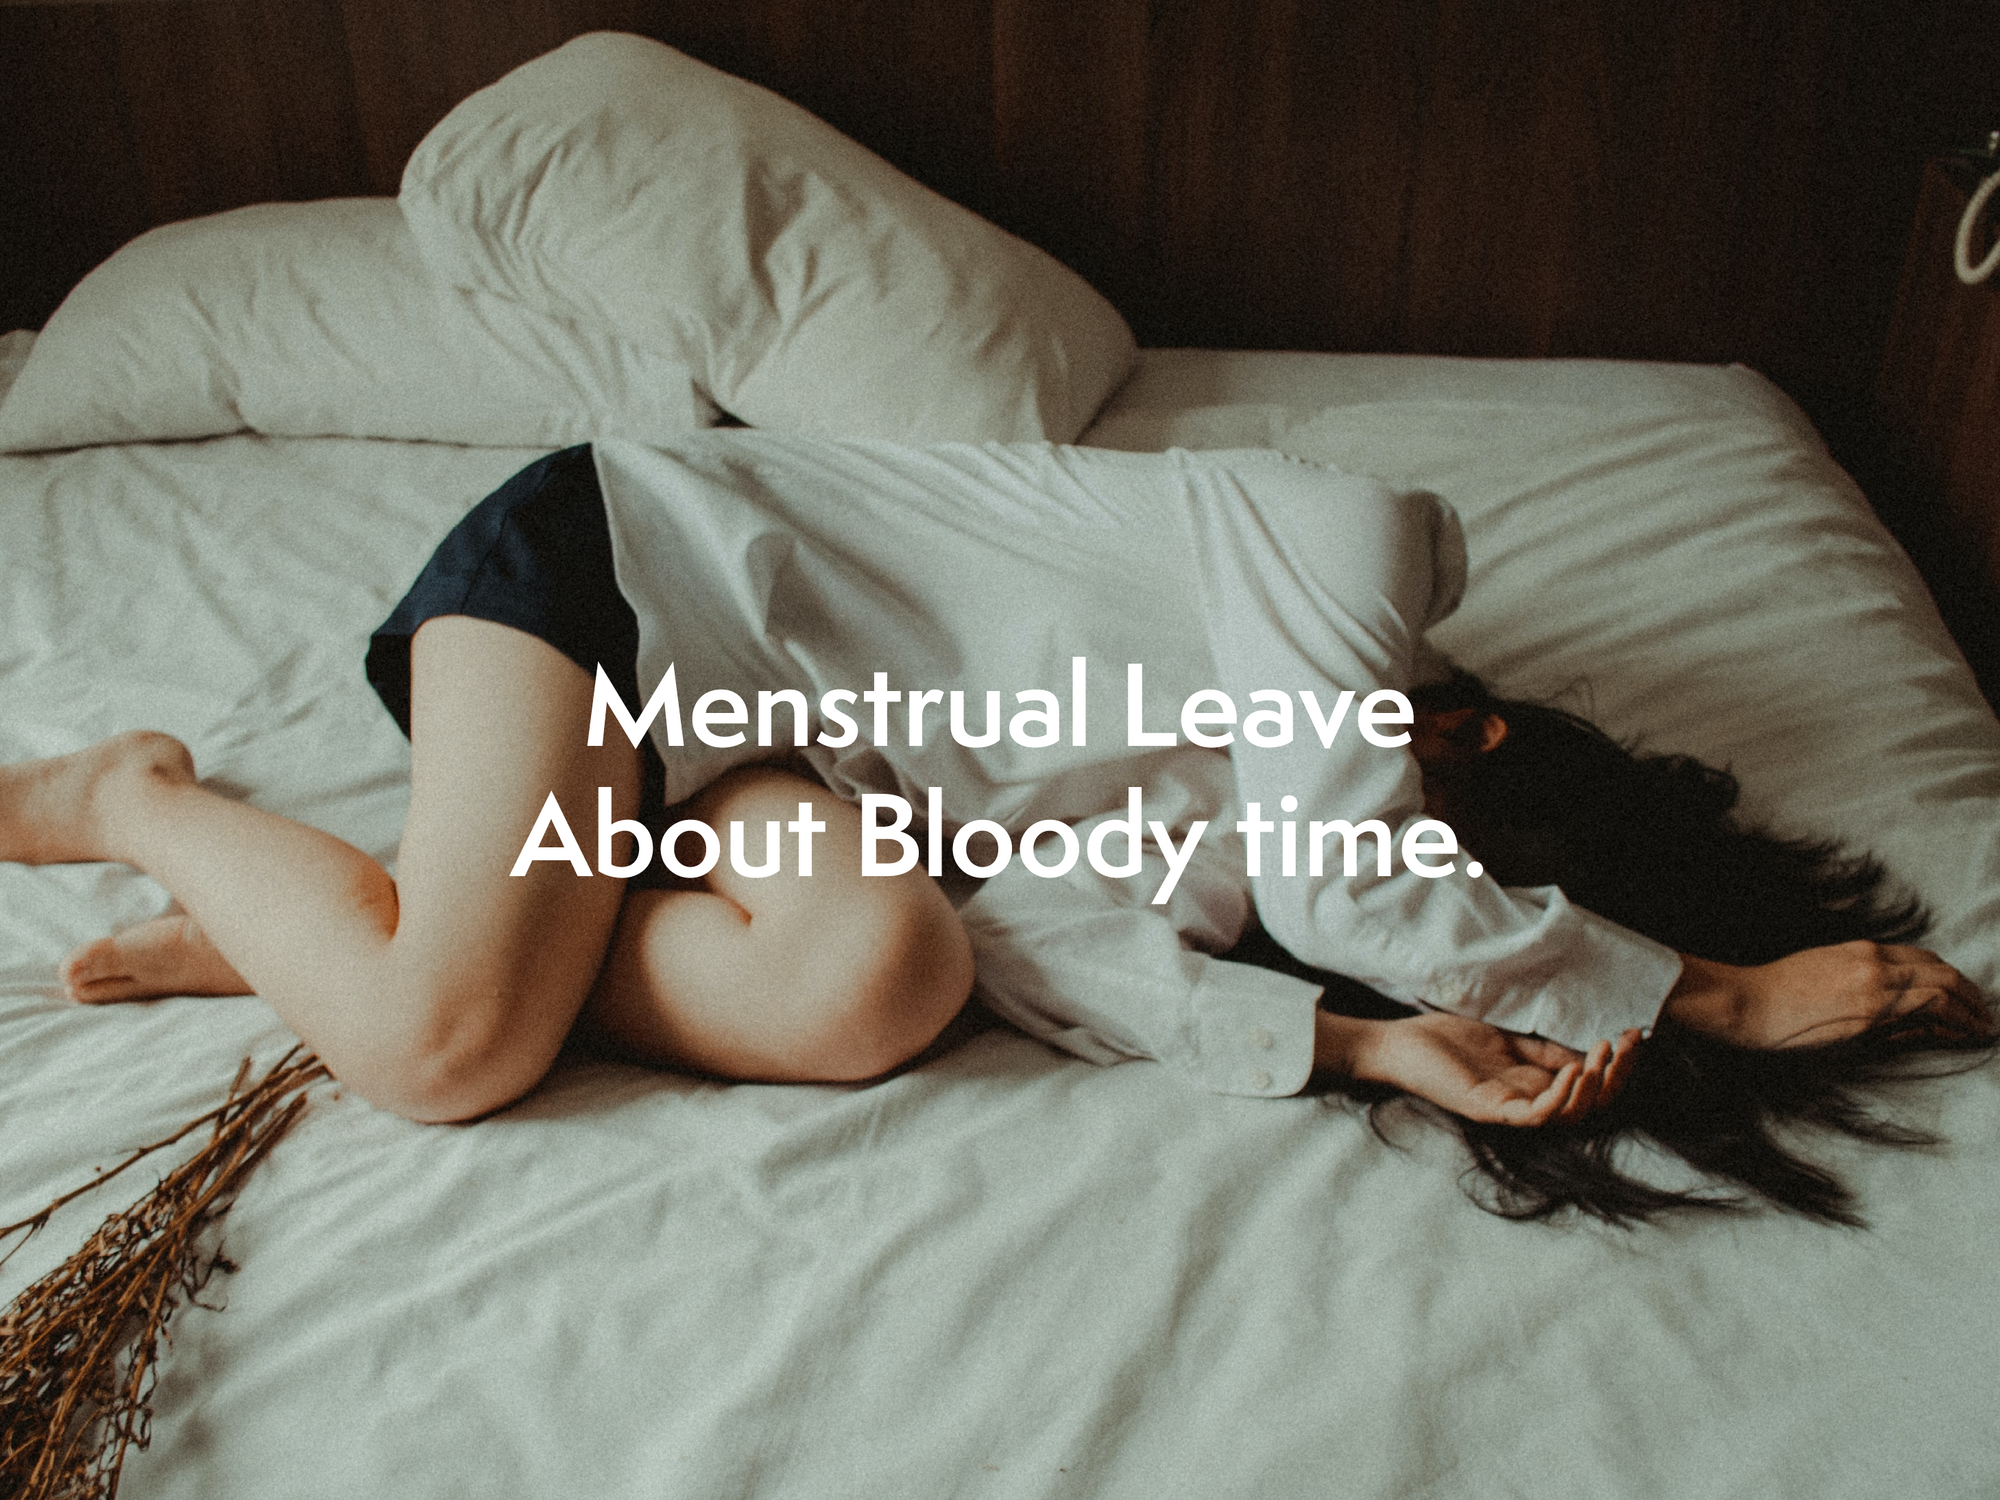 Menstrual leave. About bloody time.